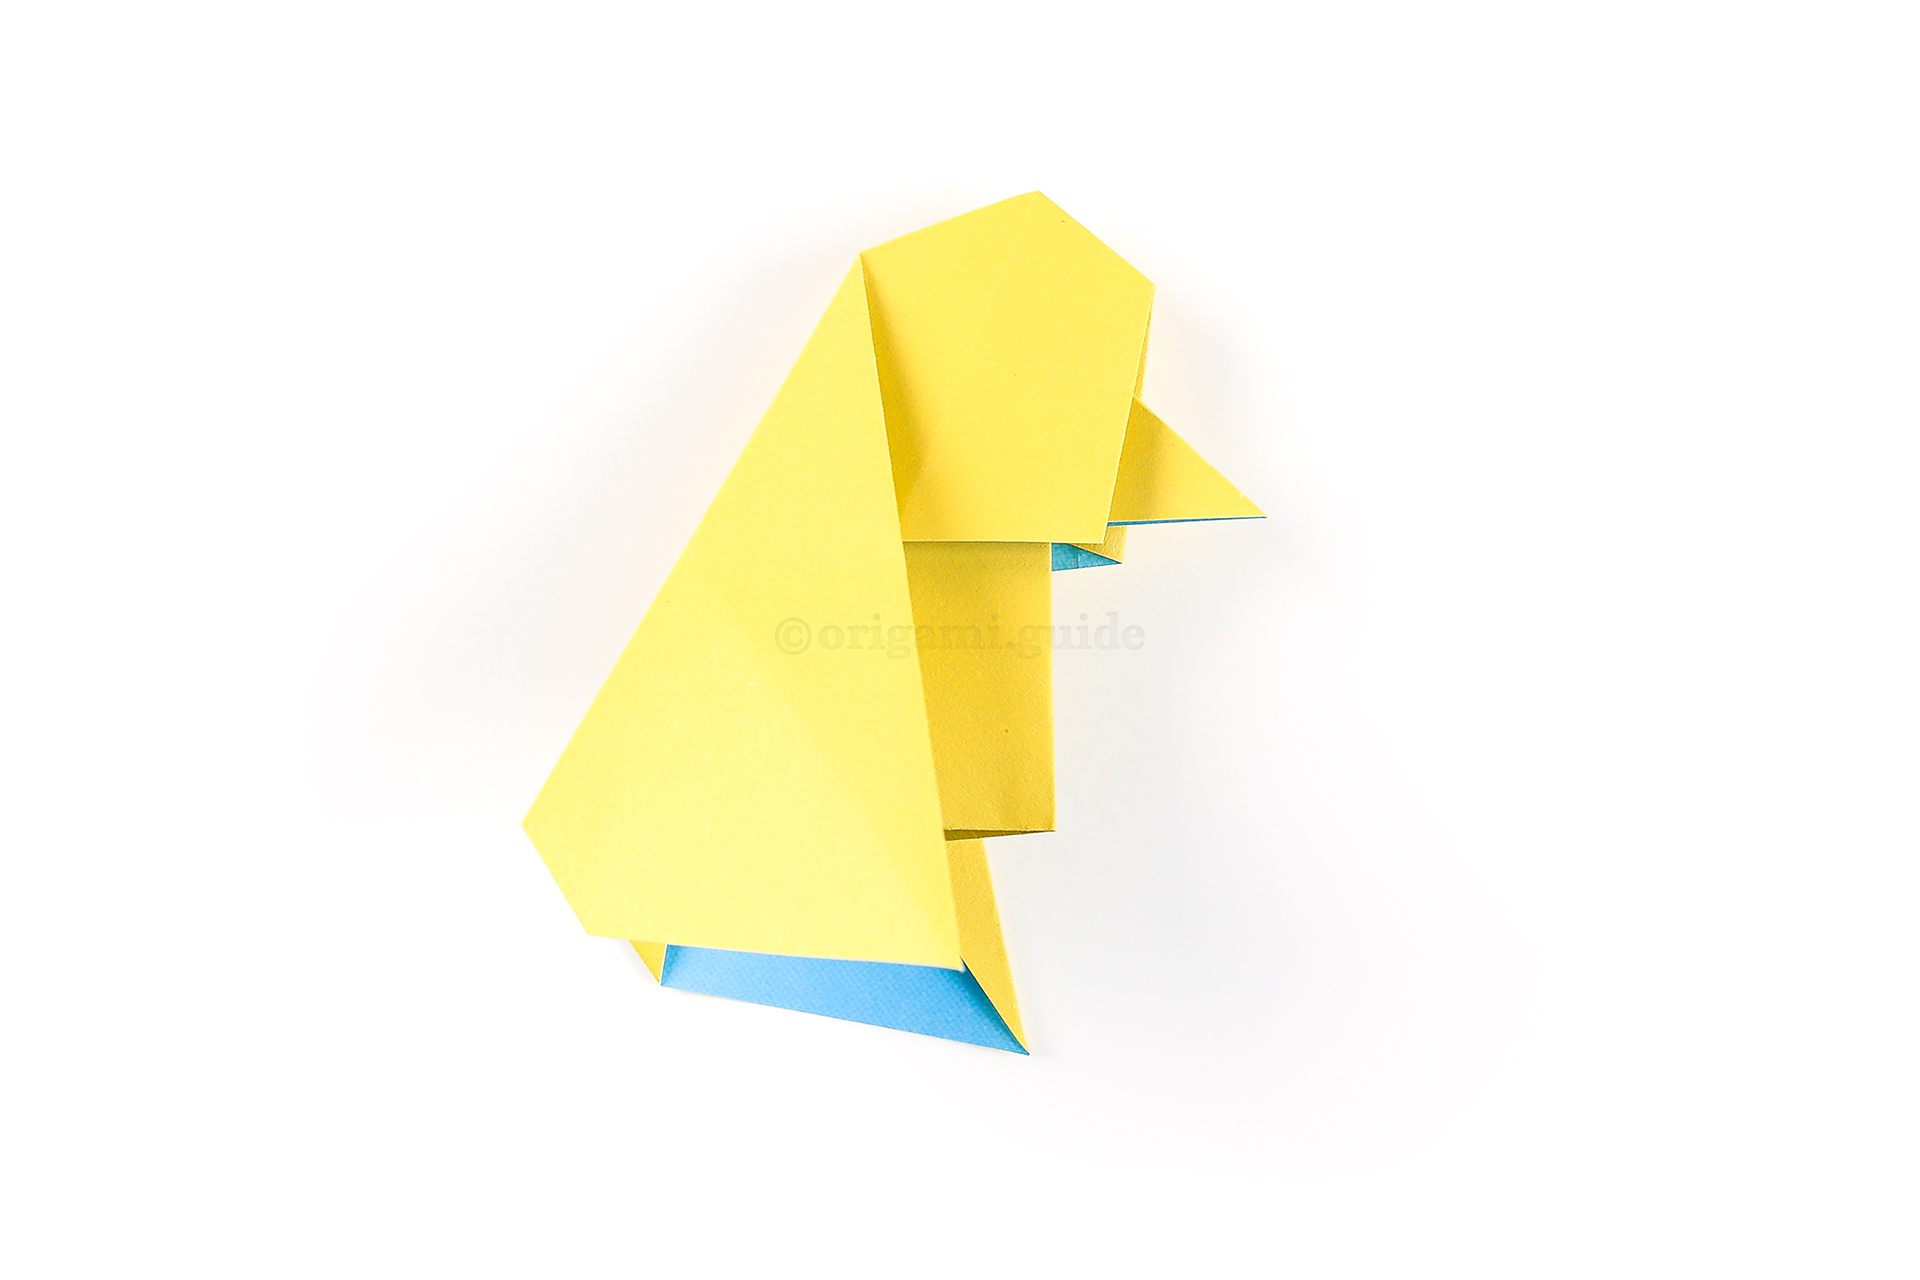 Flatten the paper back down, your little origami chick is complete.